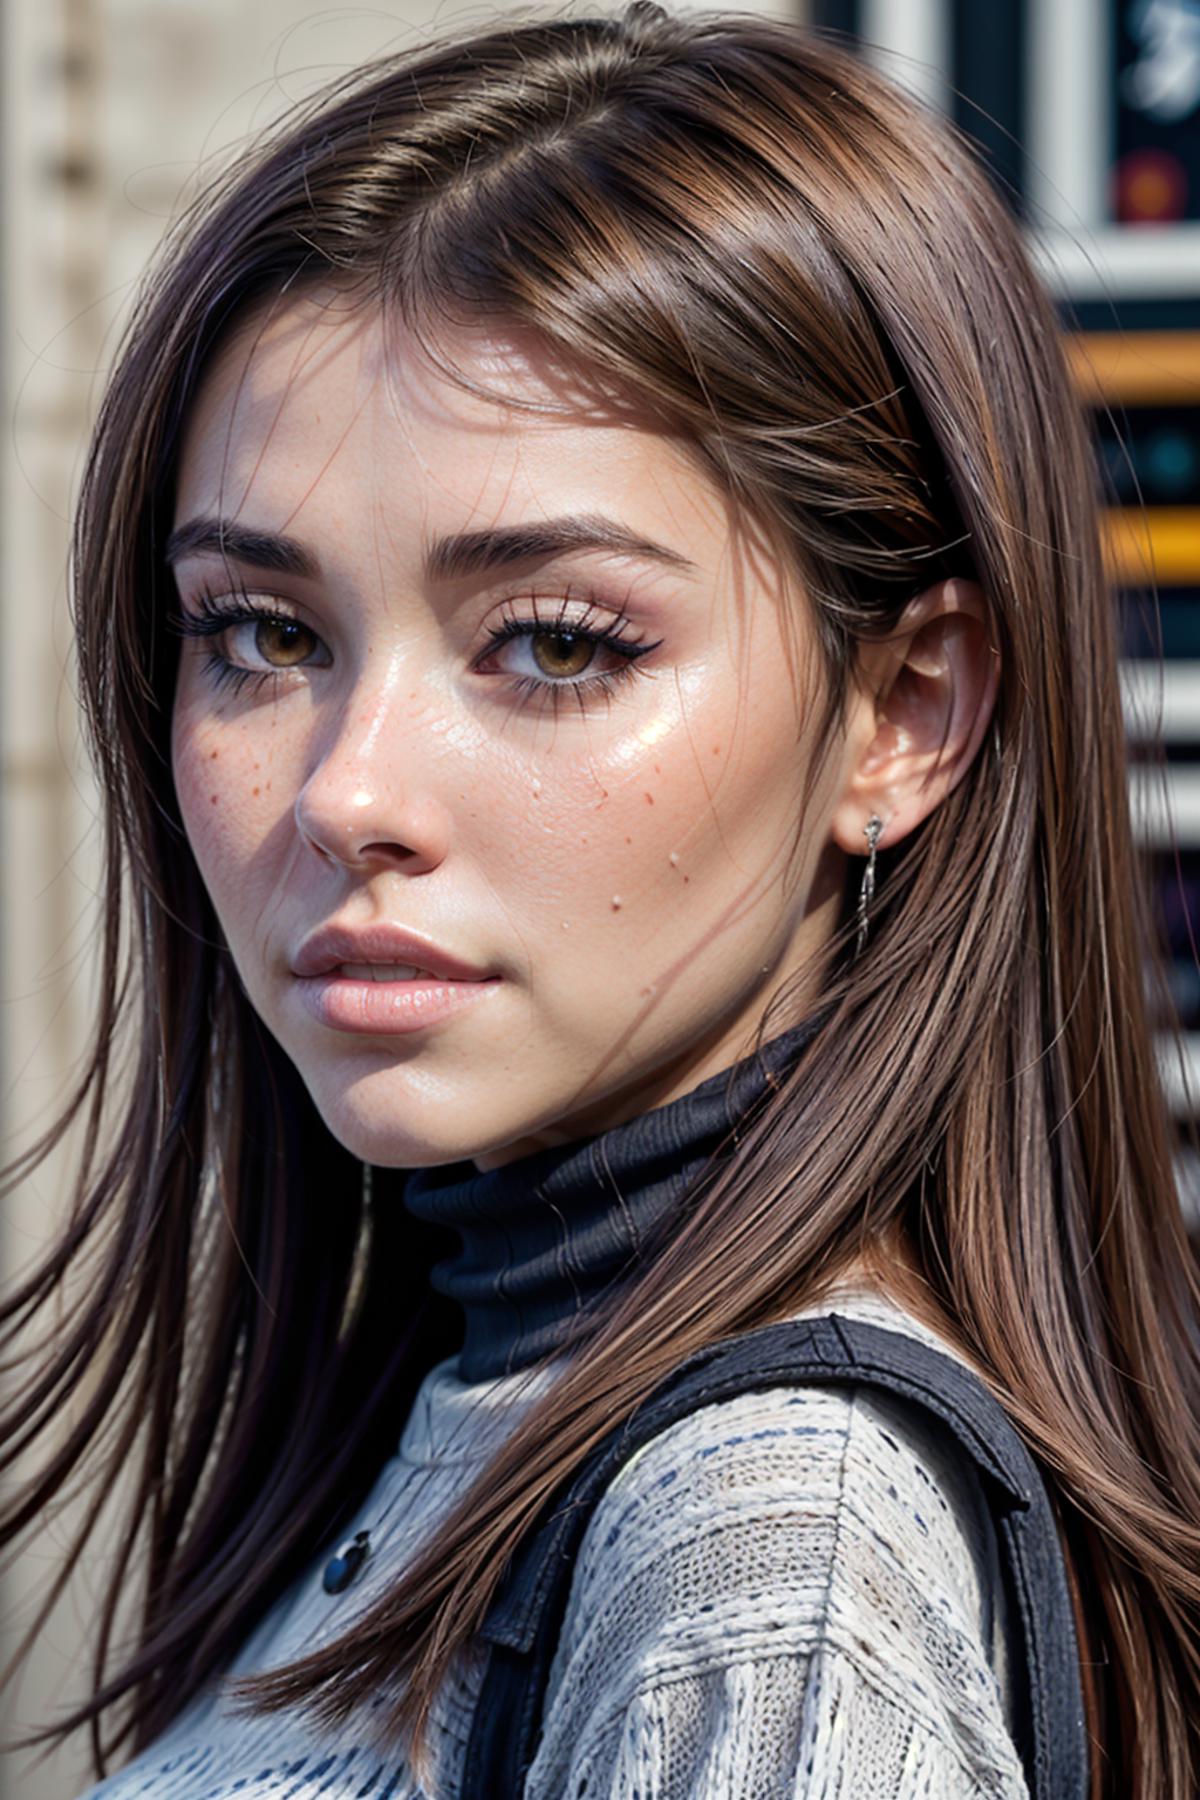 Madison Beer image by ZombieHead